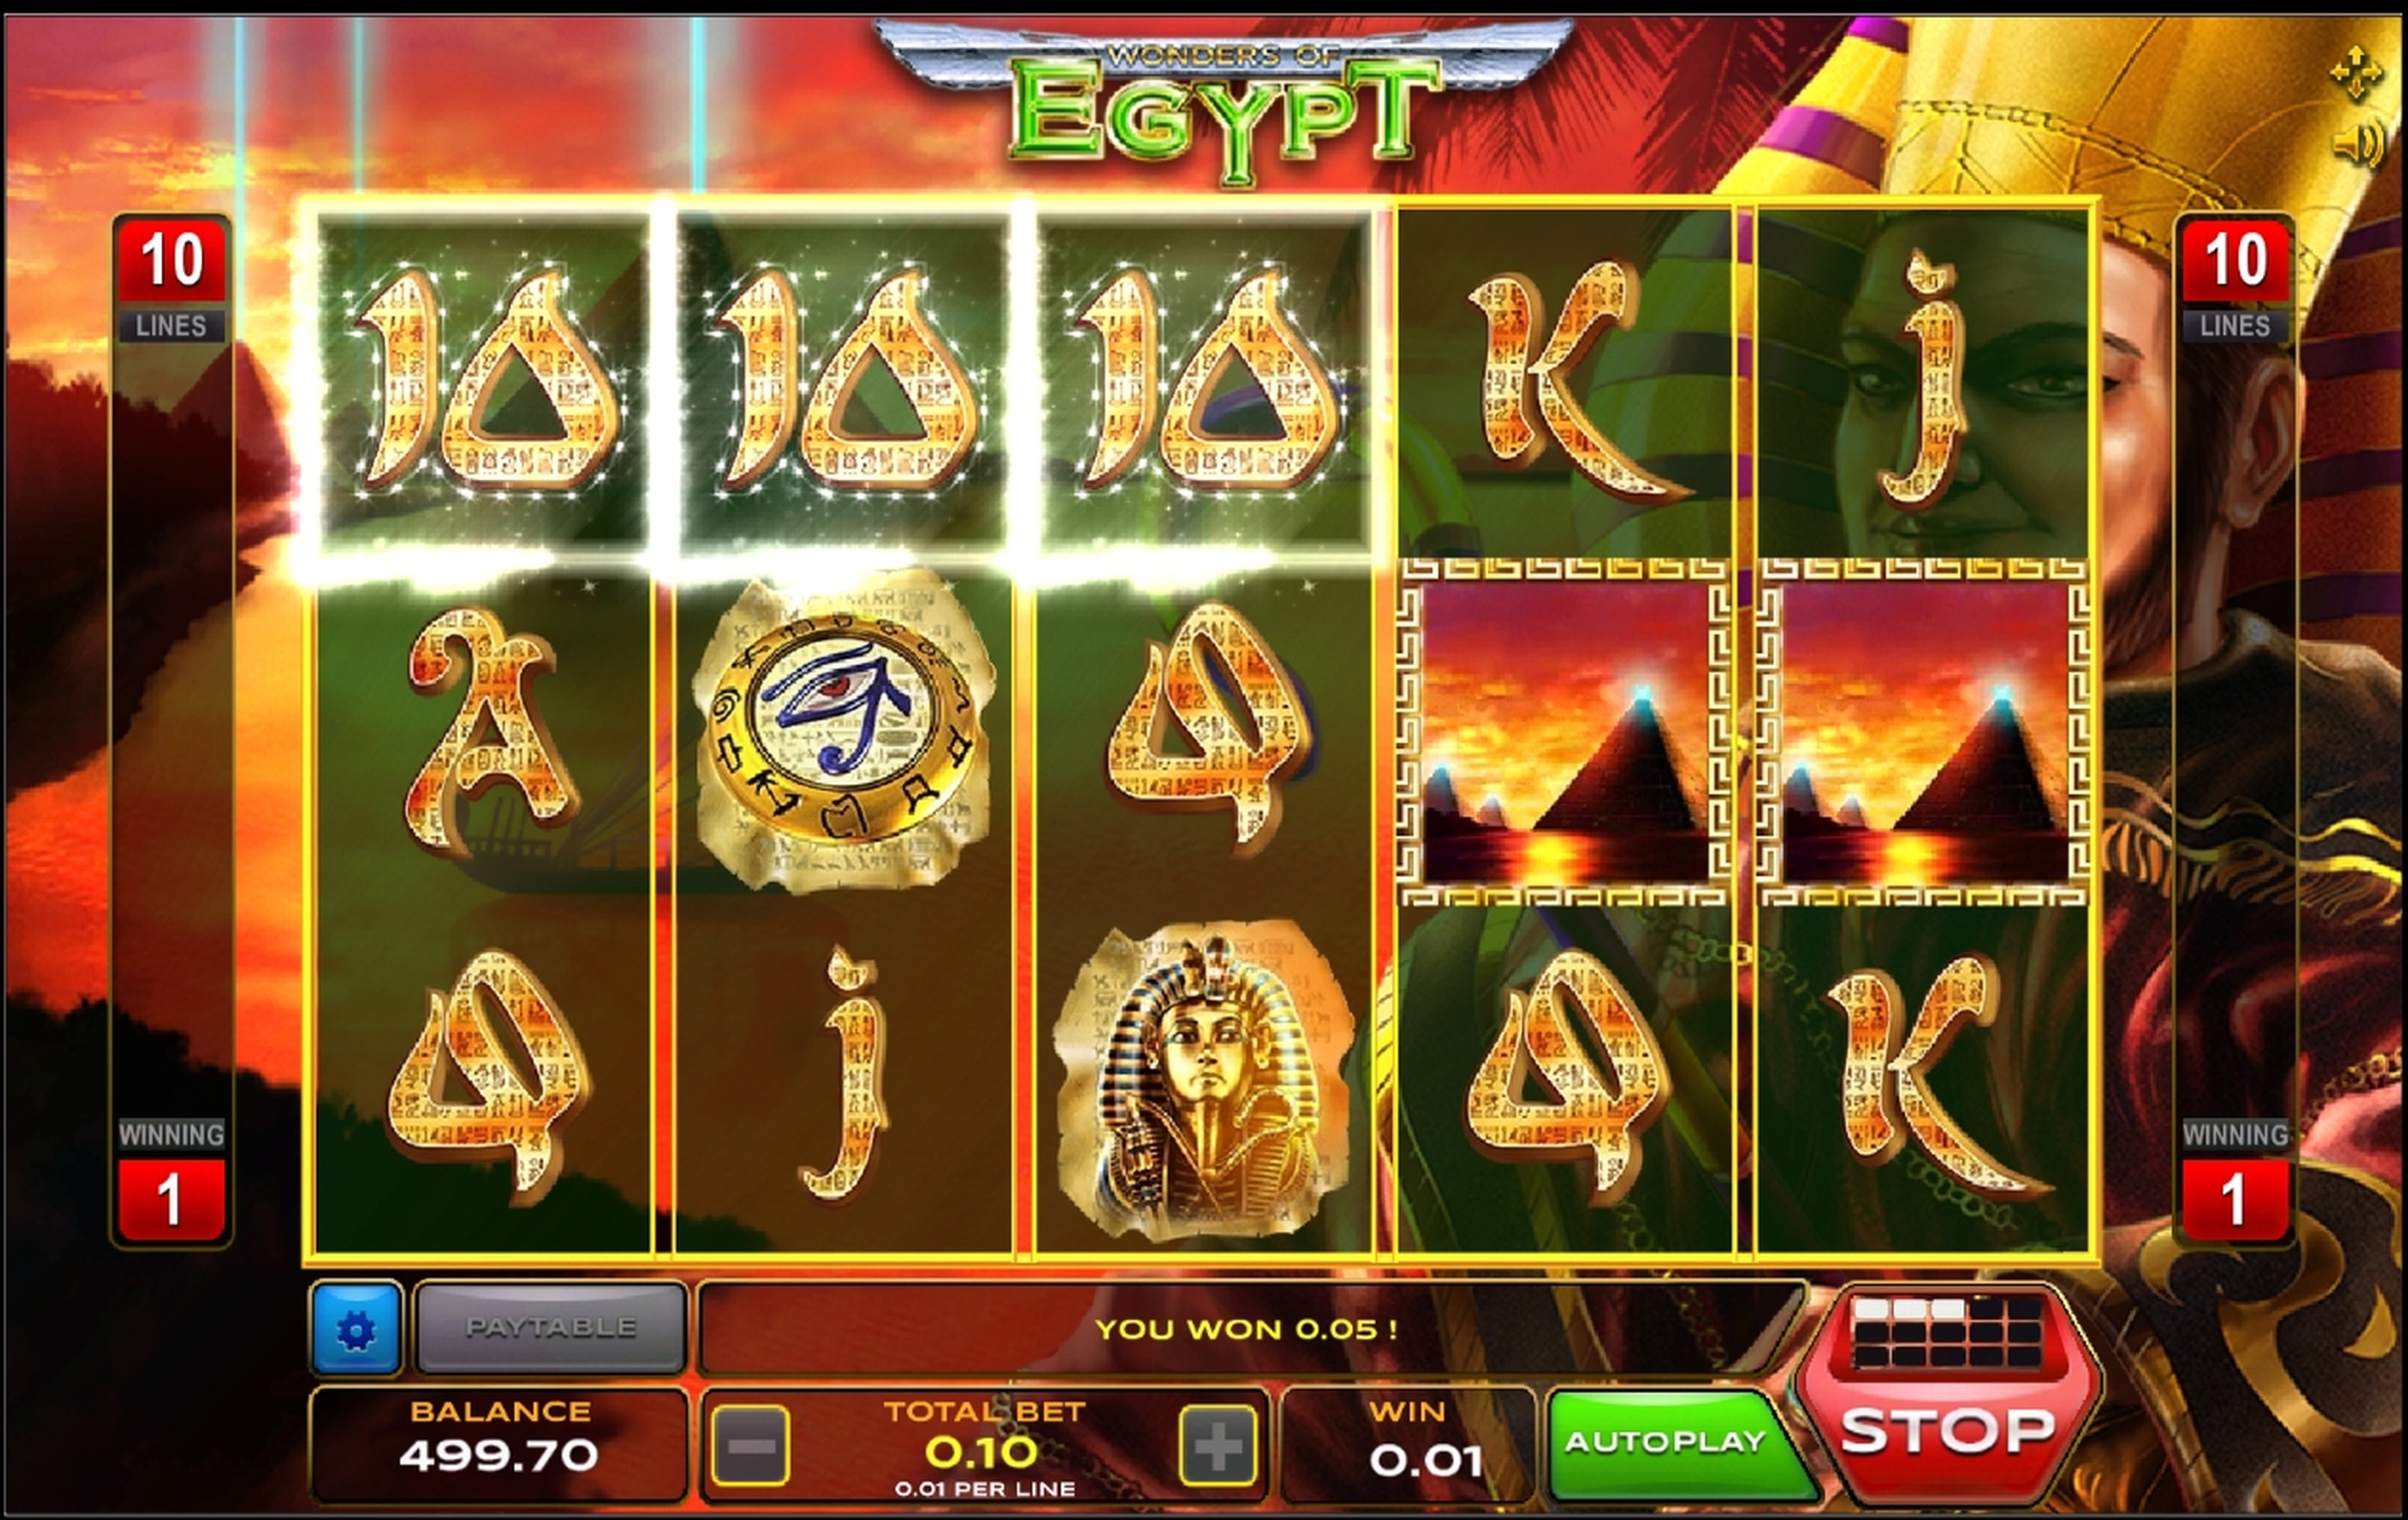 Win Money in Wonders of Egypt Free Slot Game by Xplosive Slots Group